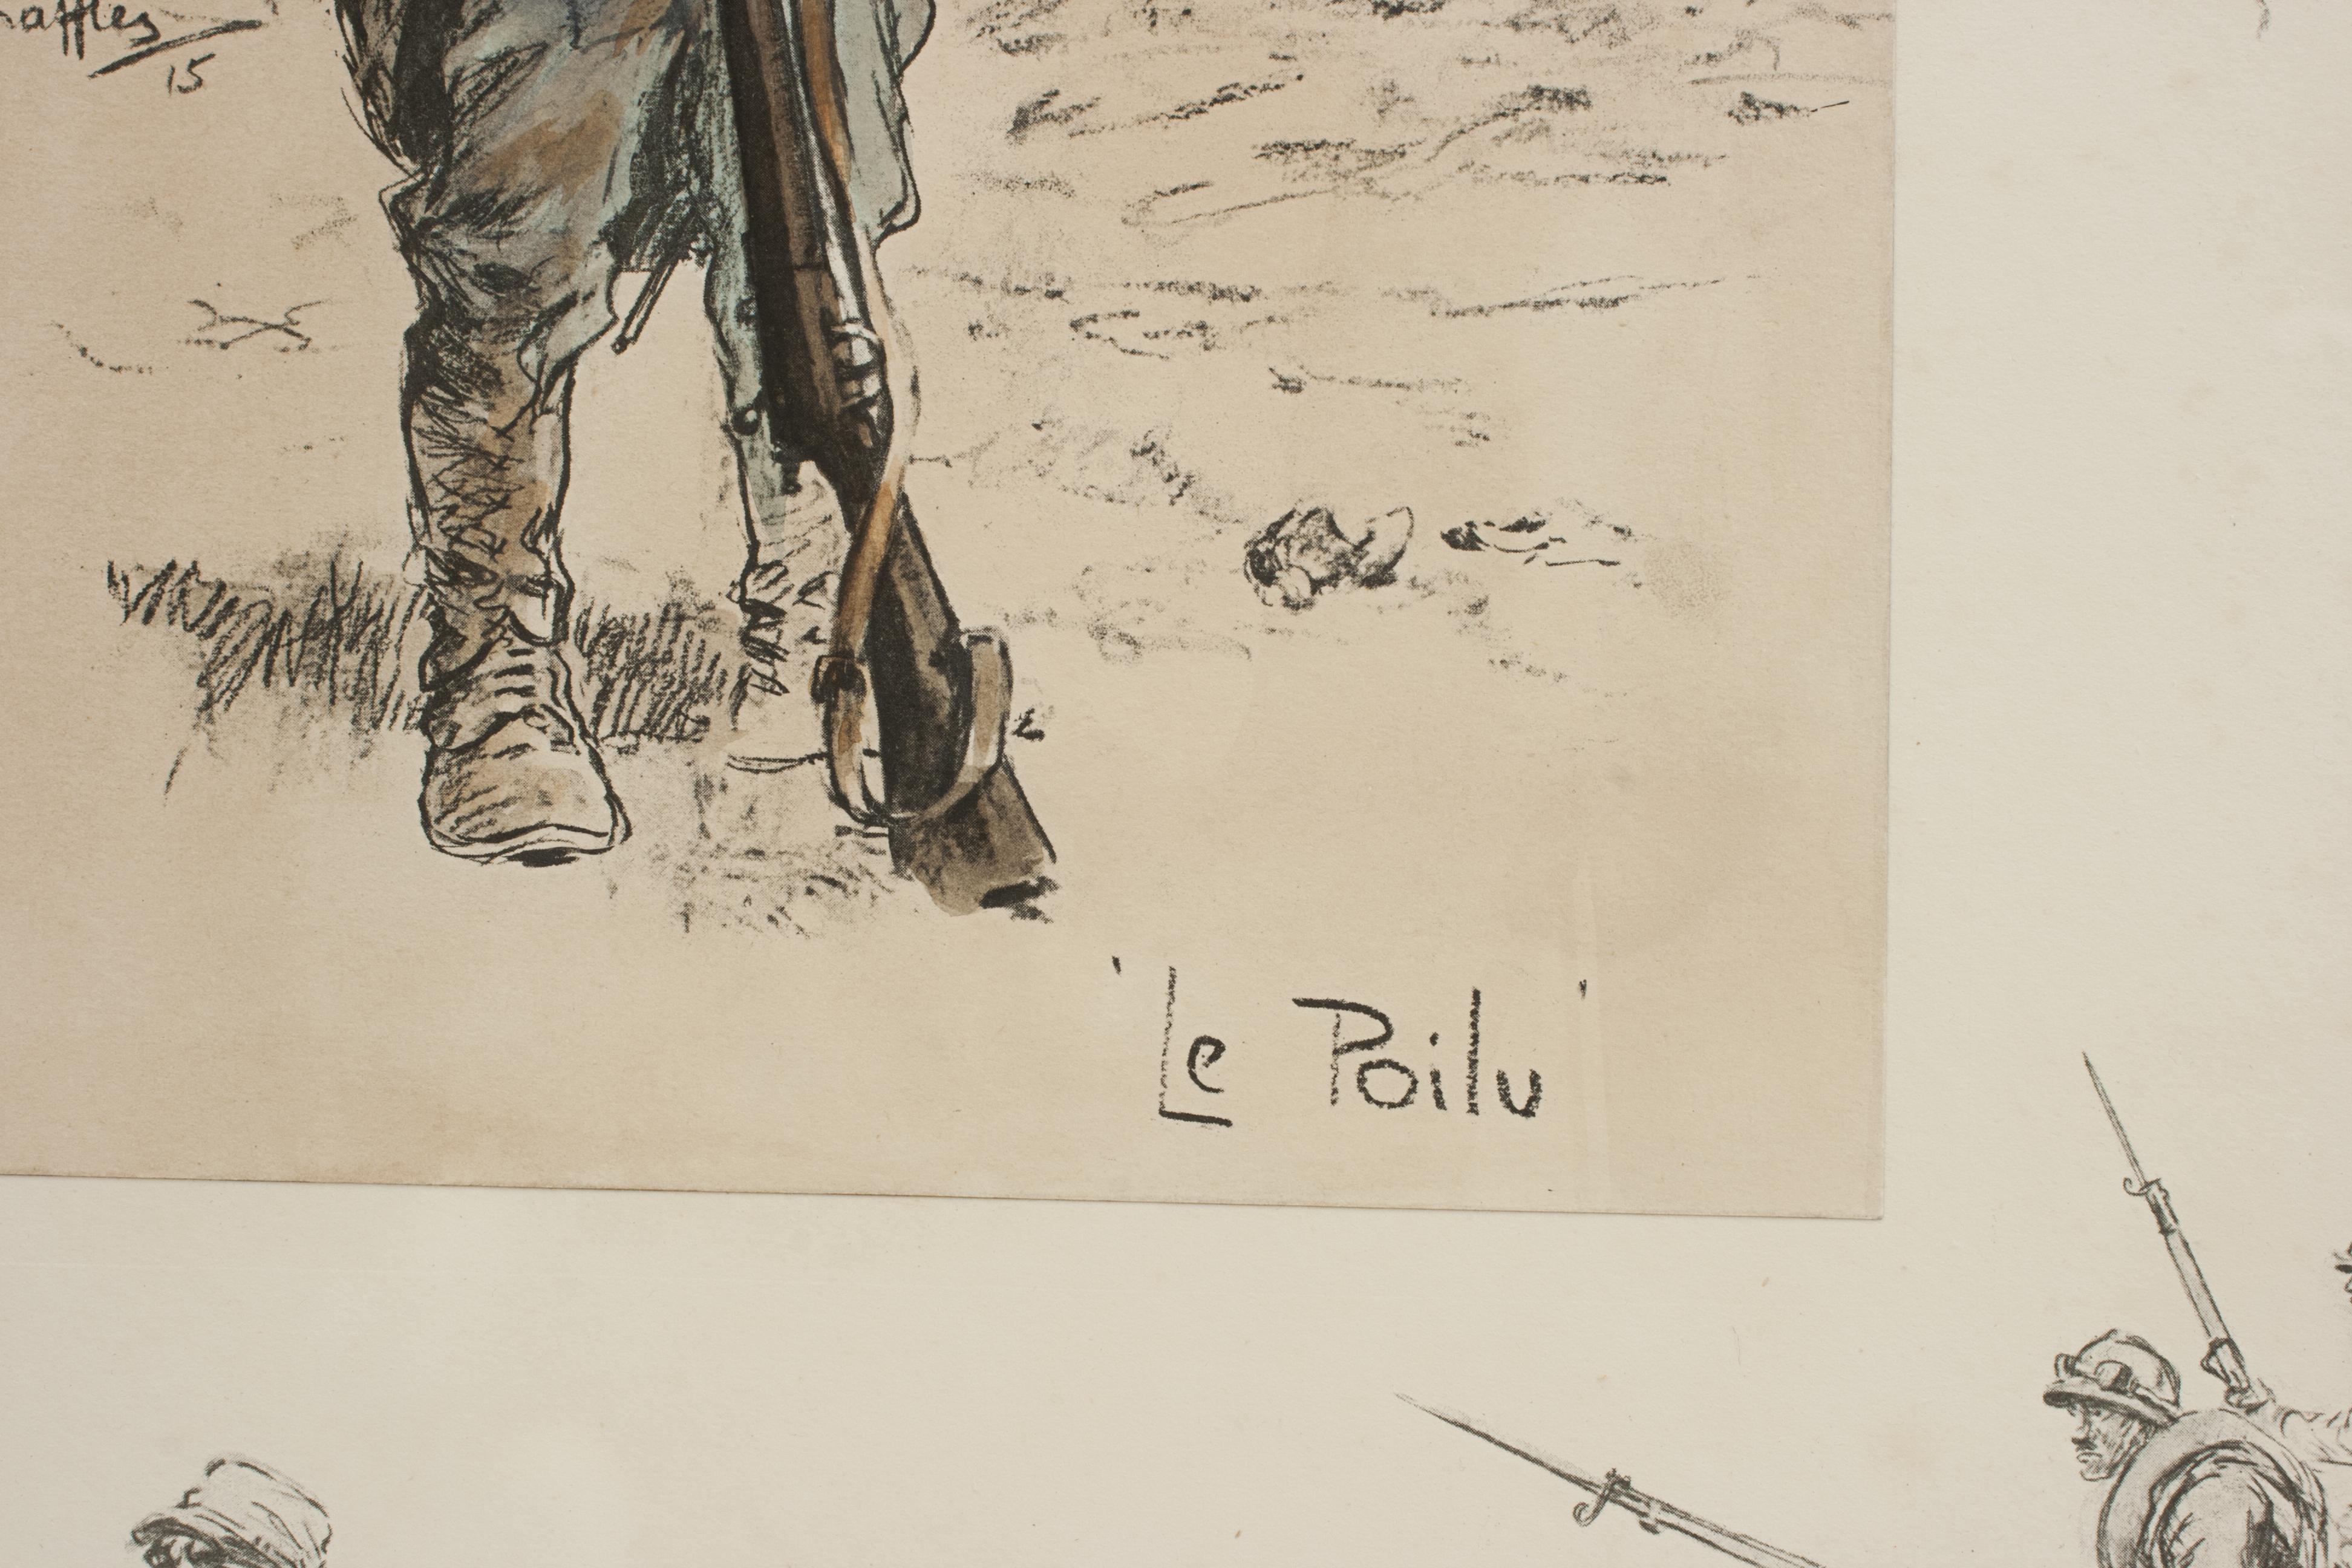 Snaffles Print, Wwi Military Print, 'le Poilu' For Sale 1